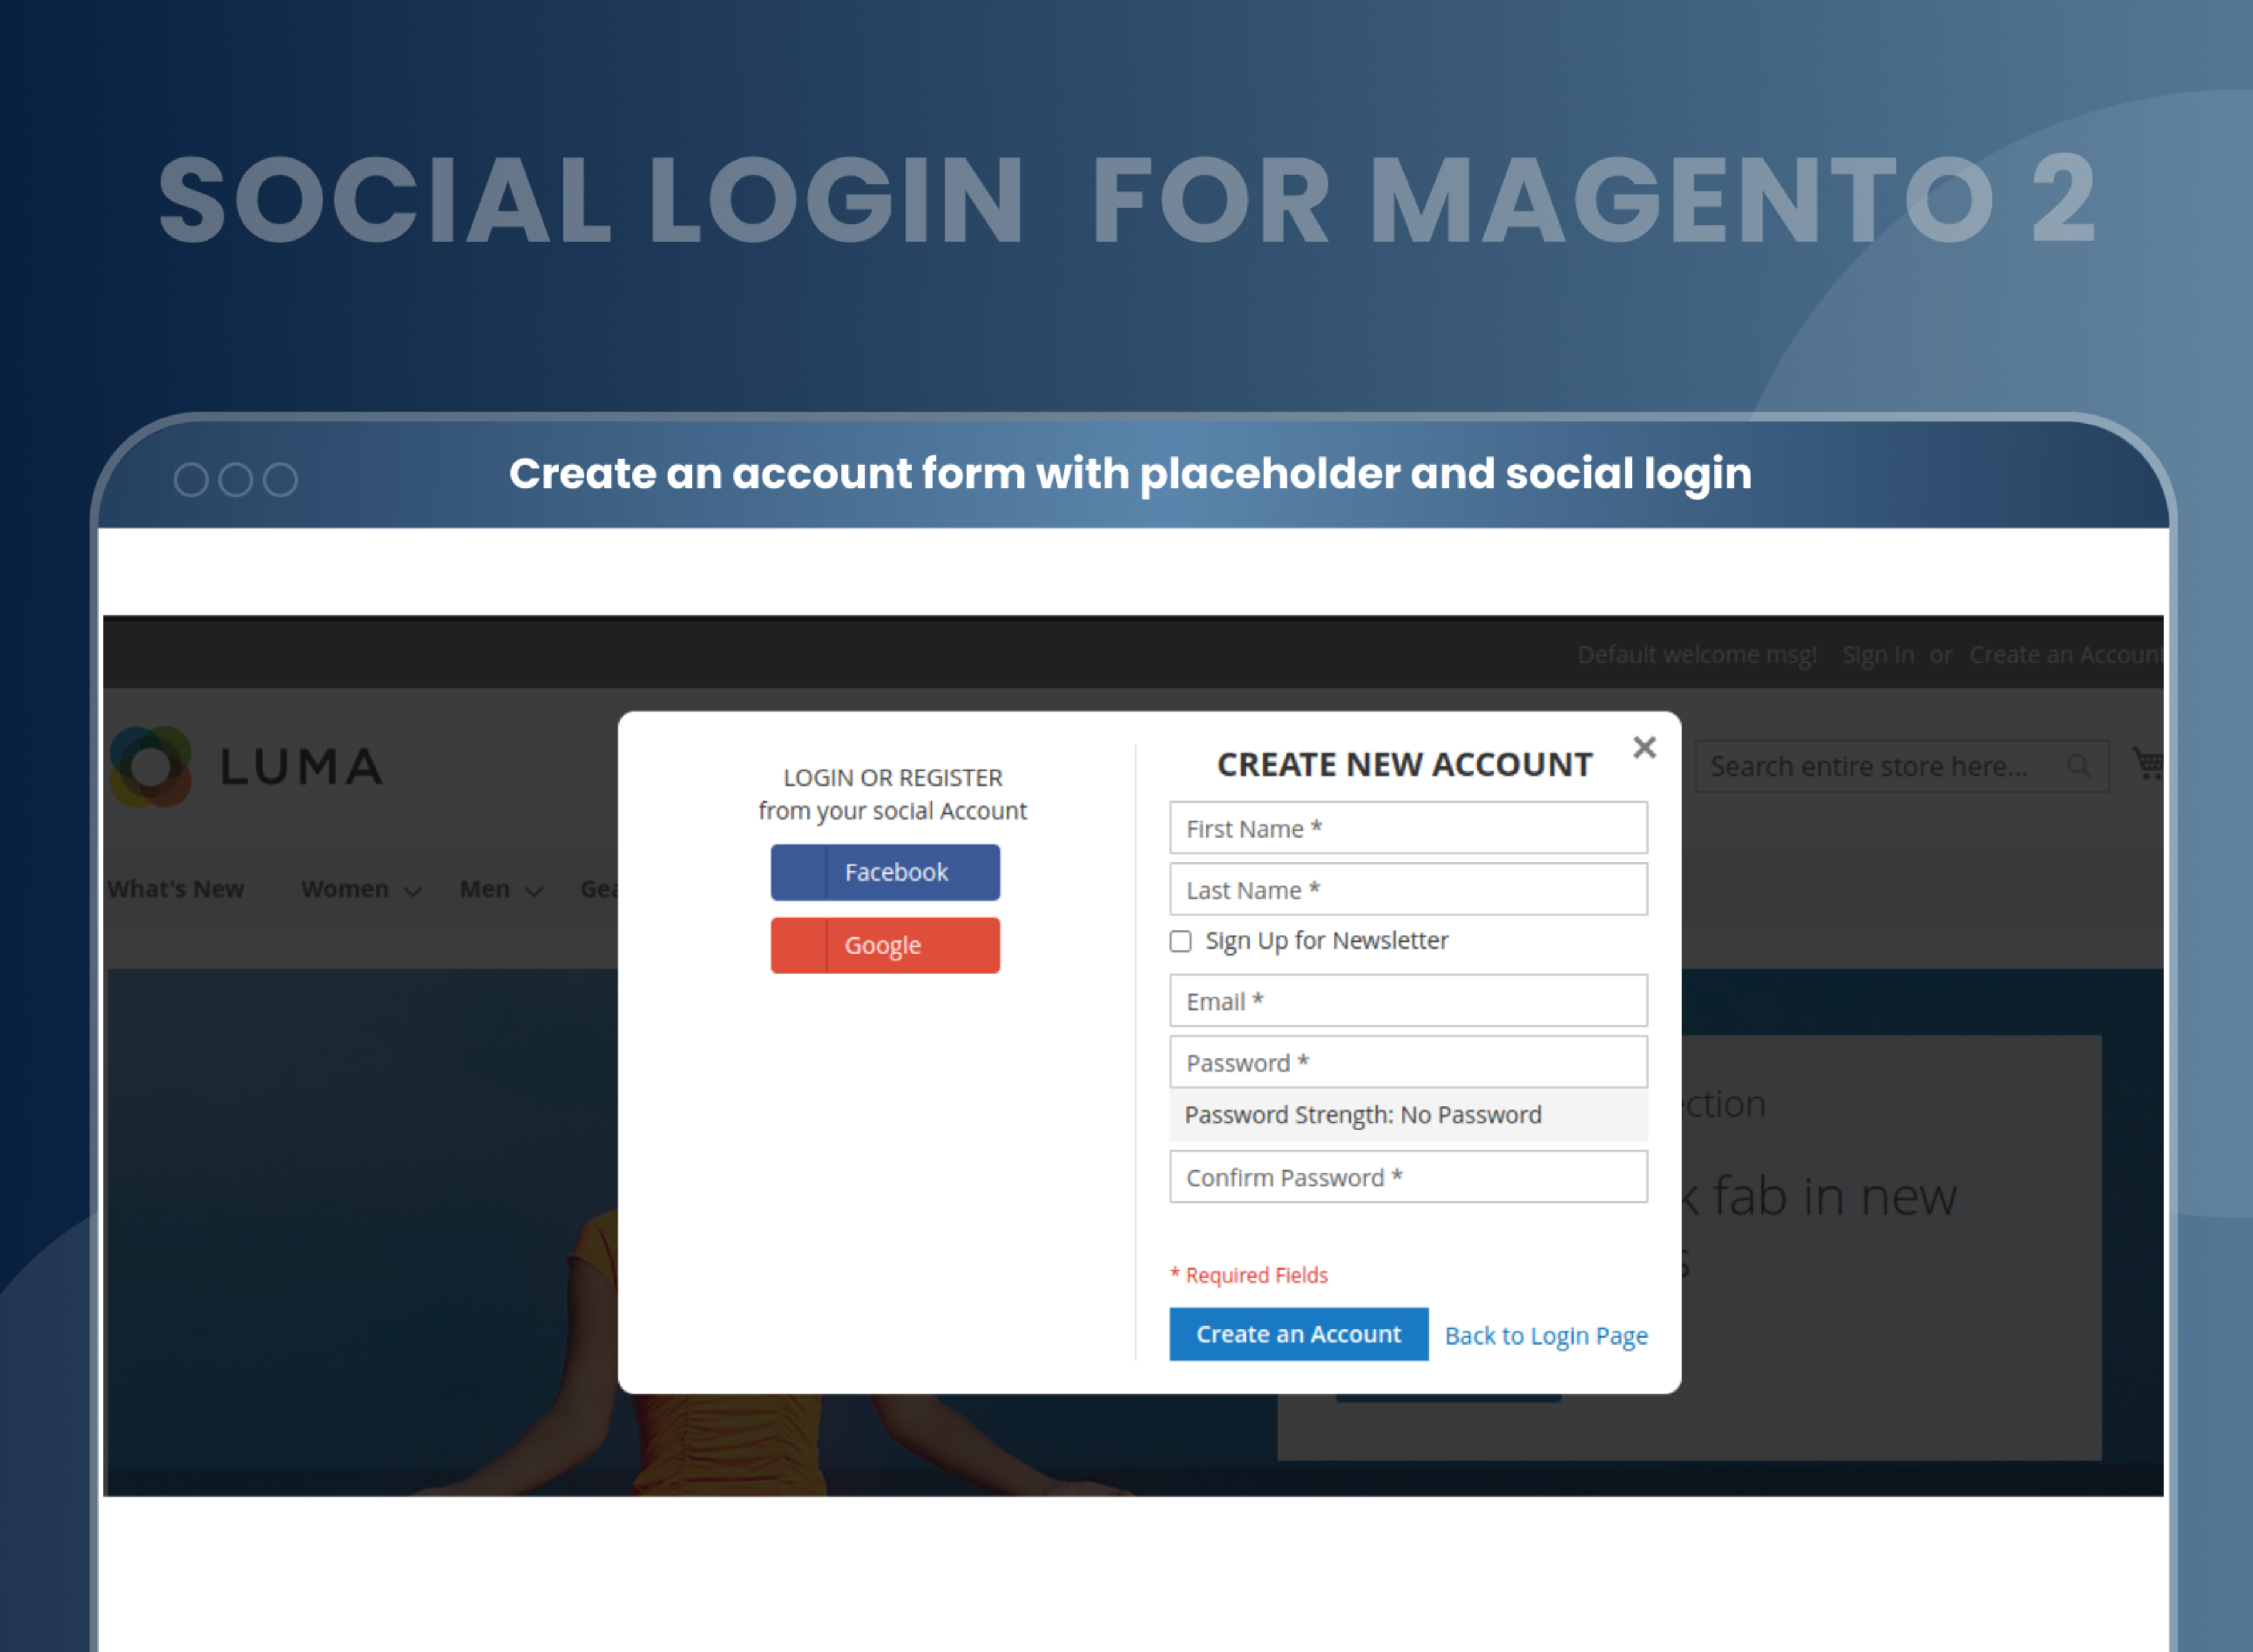  Create an account form with placeholder and social login